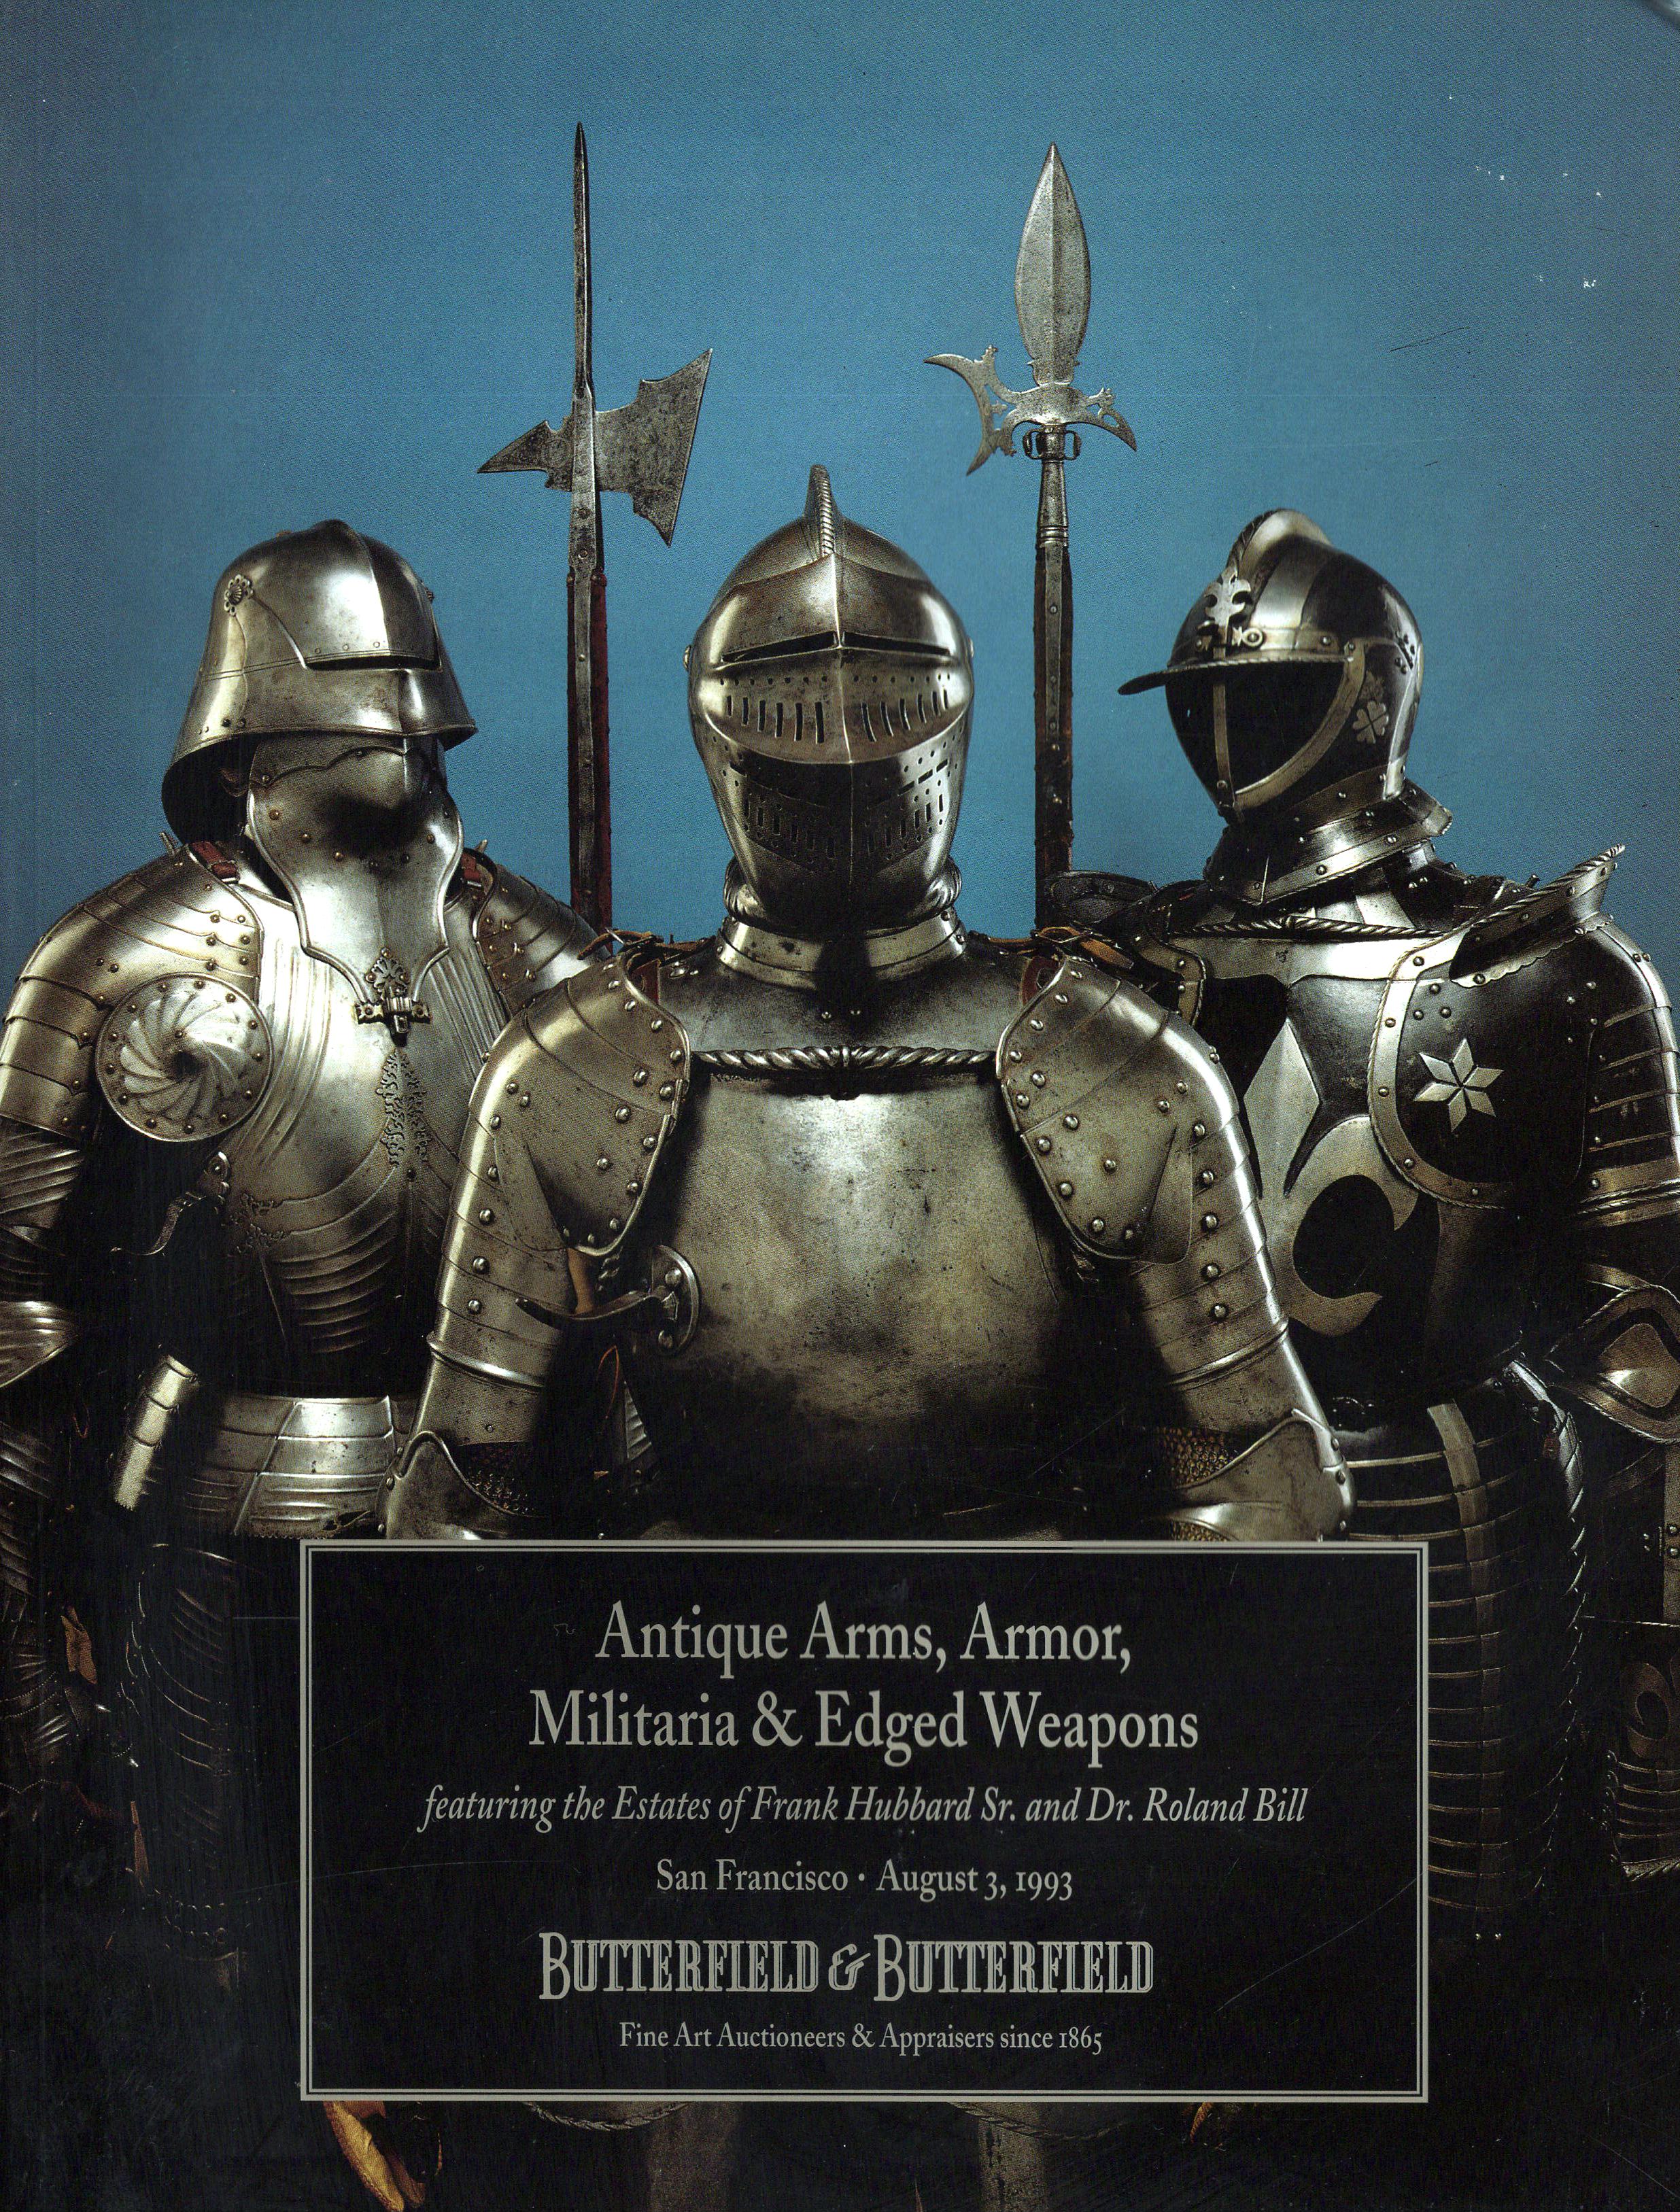 Butterfield & Butterfield August 1993 Antique Arms, Armor, Militaria & Edged Wea